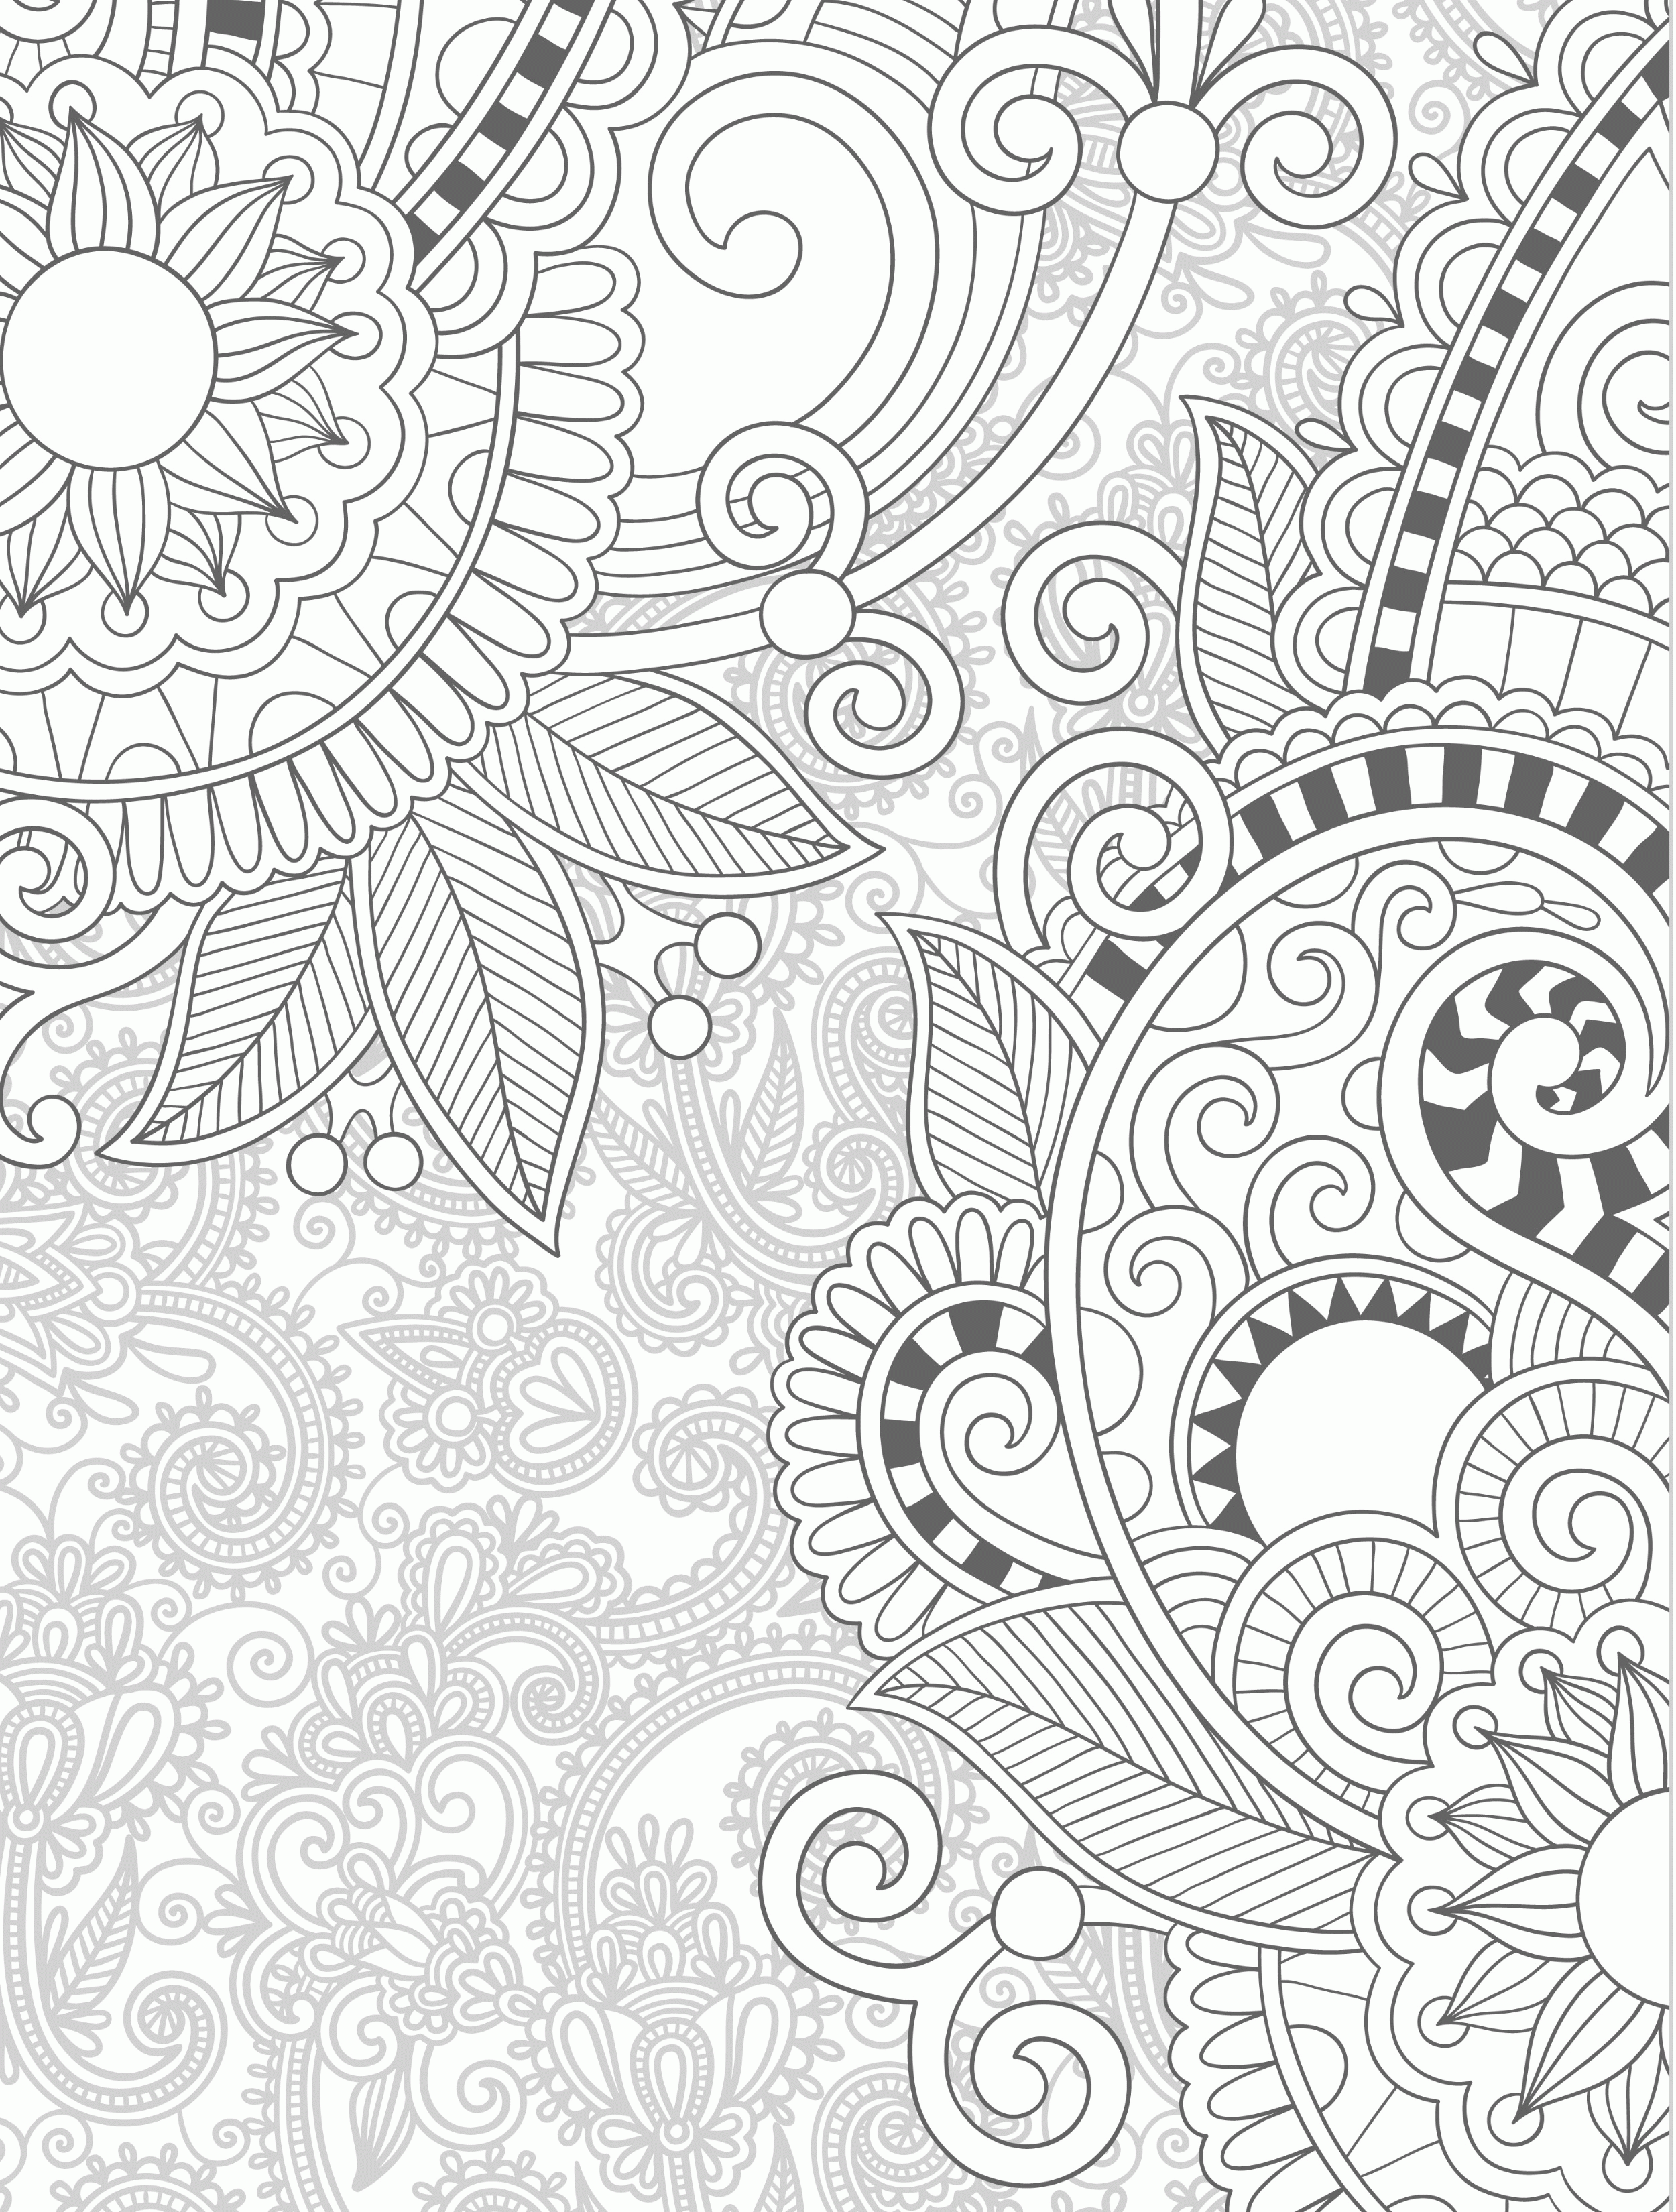 24 More Free Printable Adult Coloring Pages - Page 11 of 25 ...